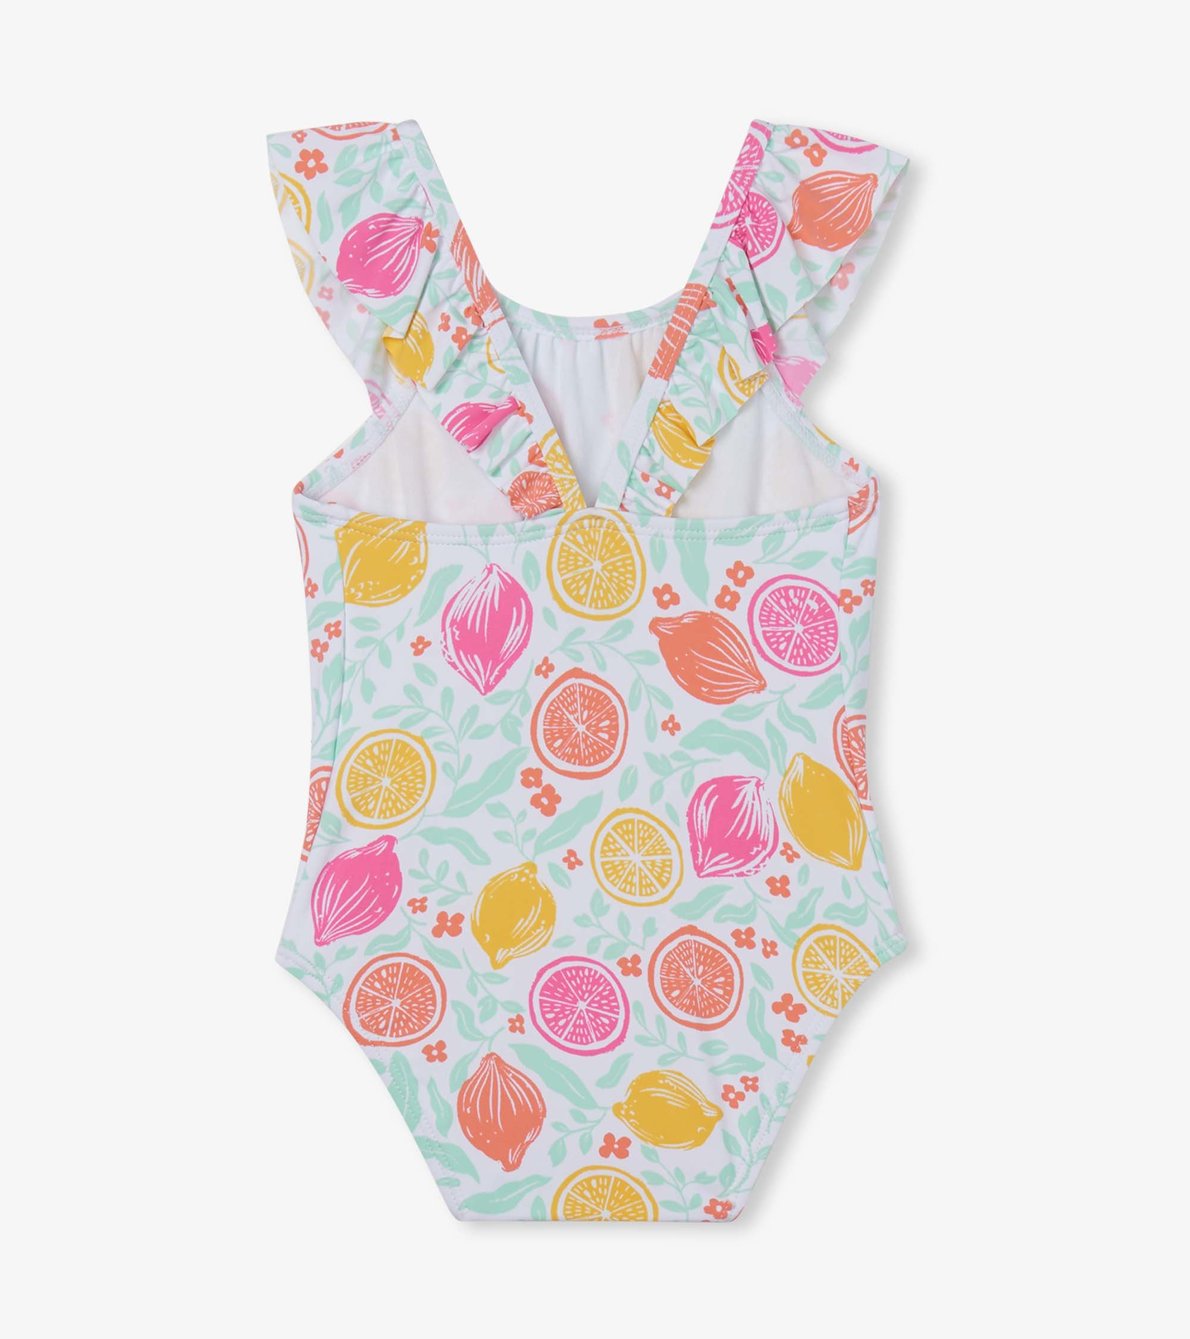 View larger image of Citrus Baby Ruffle Swimsuit